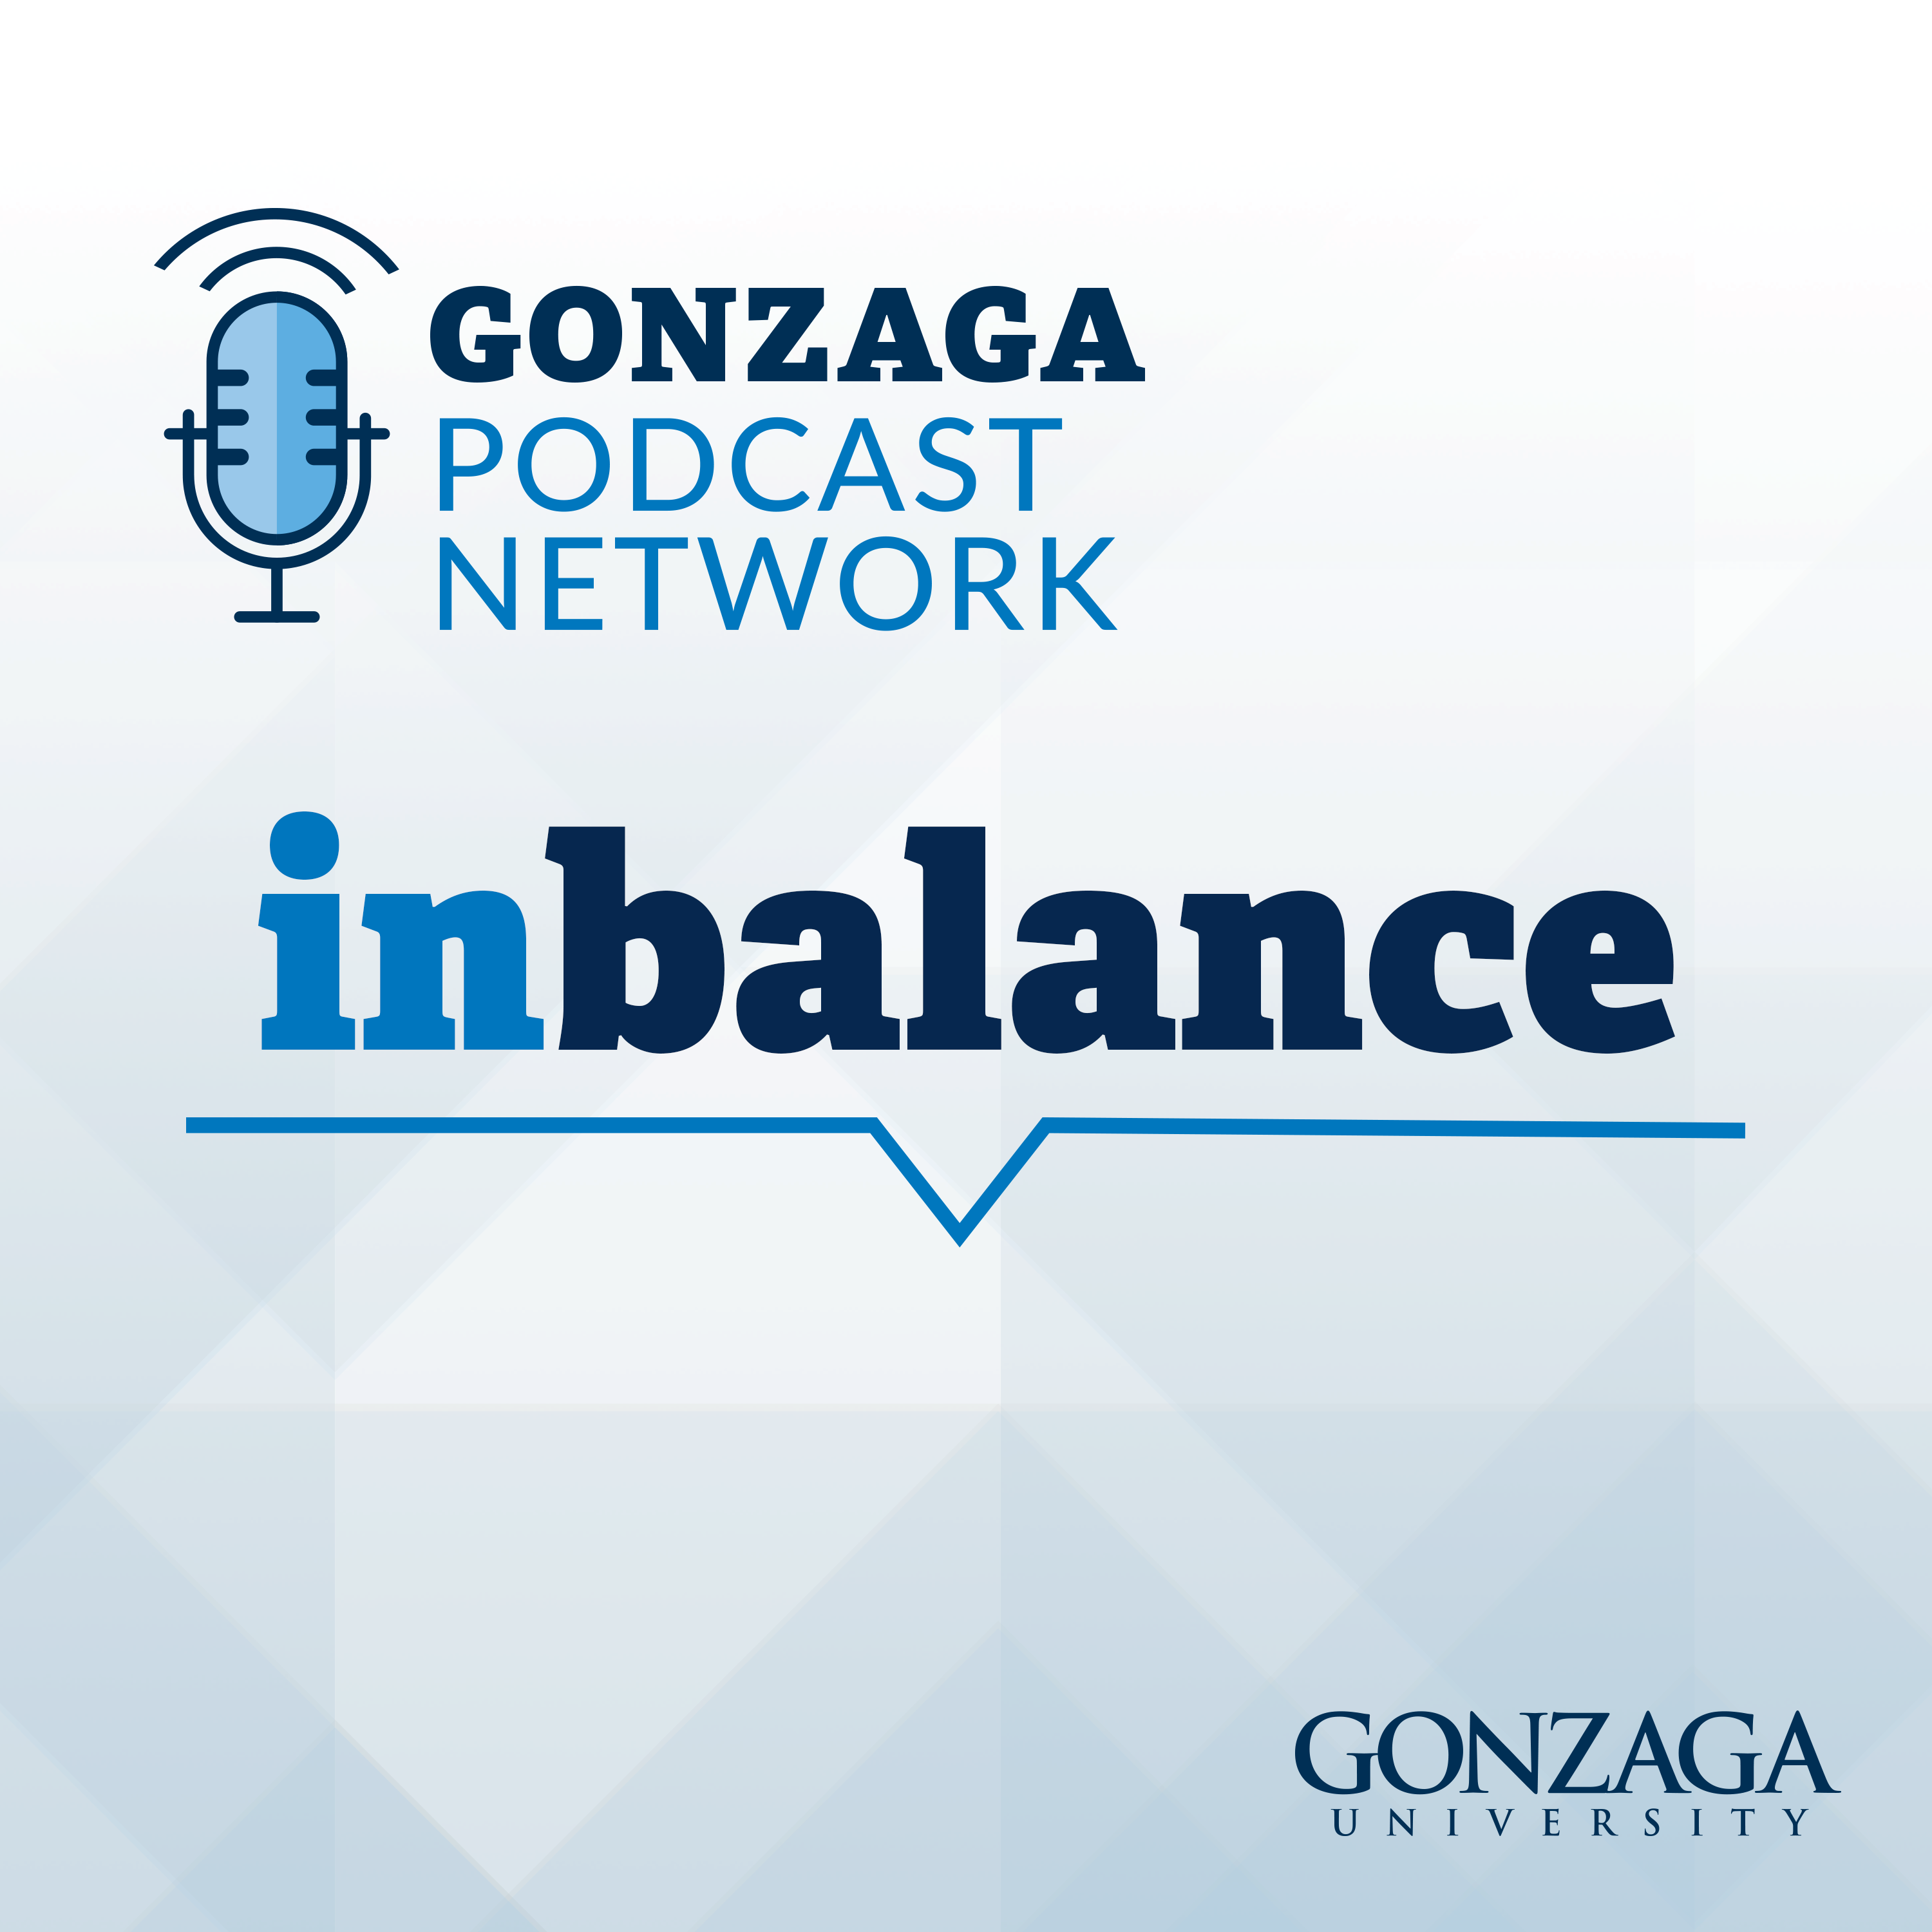 Season 2 - Episode 5: Towards Mission Alignment: A discussion on divestment, equity, and intersectional environmentalism at Gonzaga